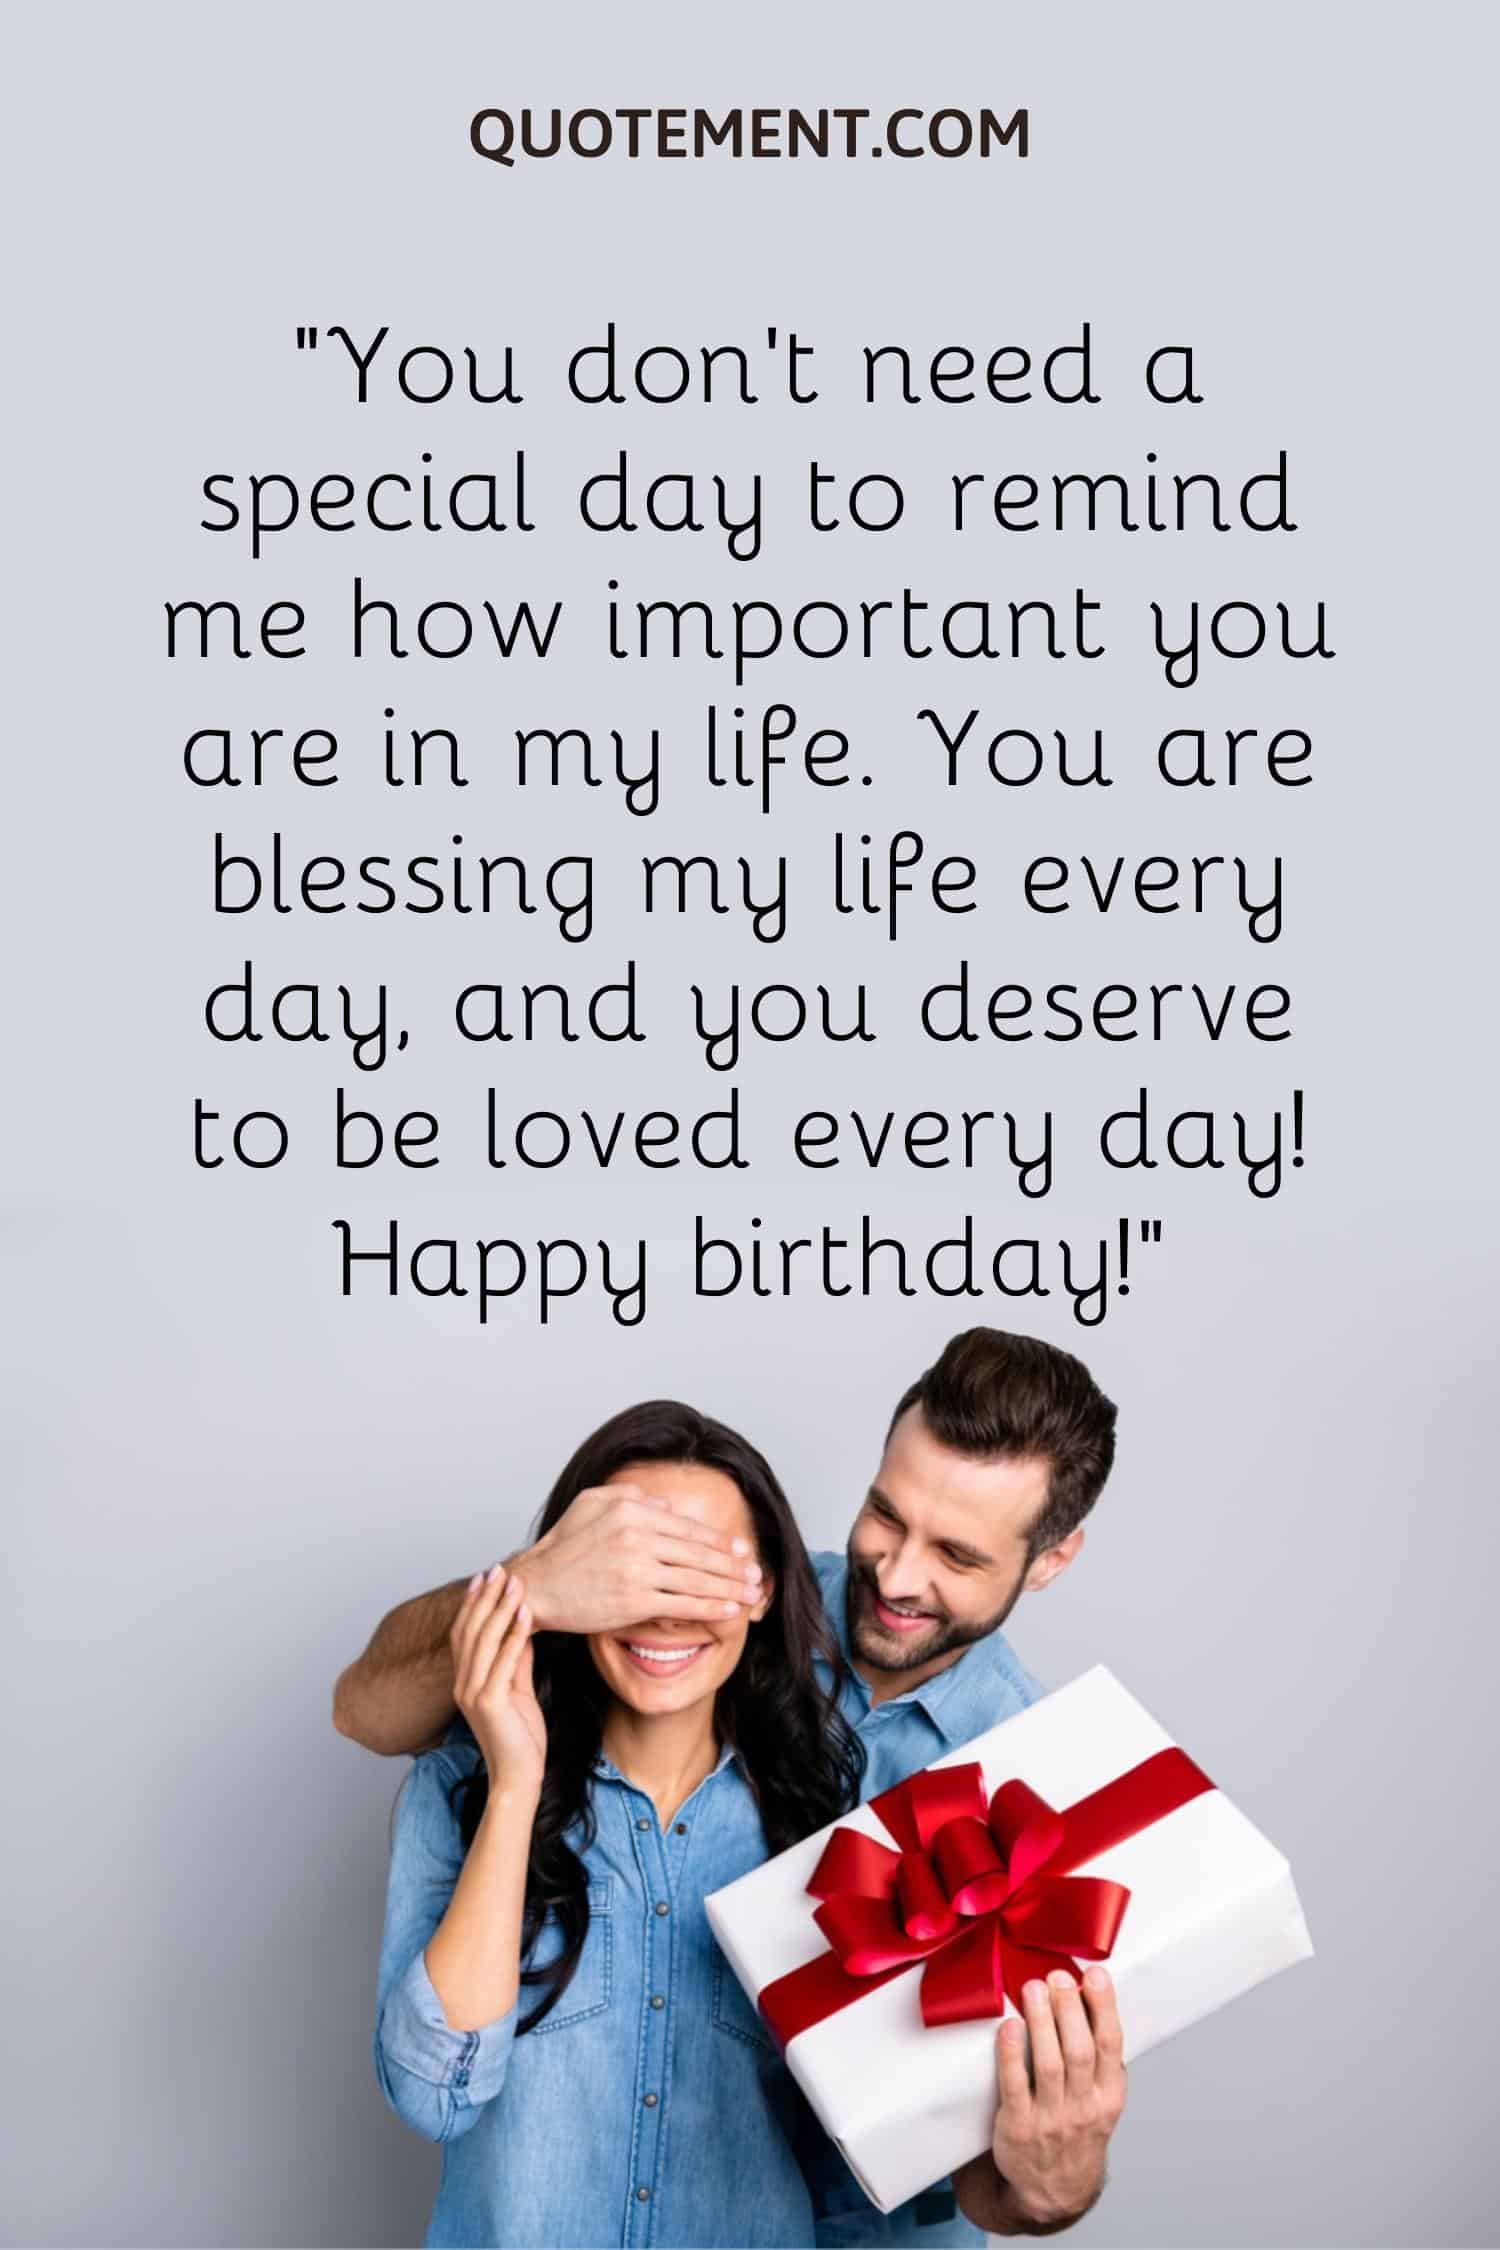 You don’t need a special day to remind me how important you are in my life